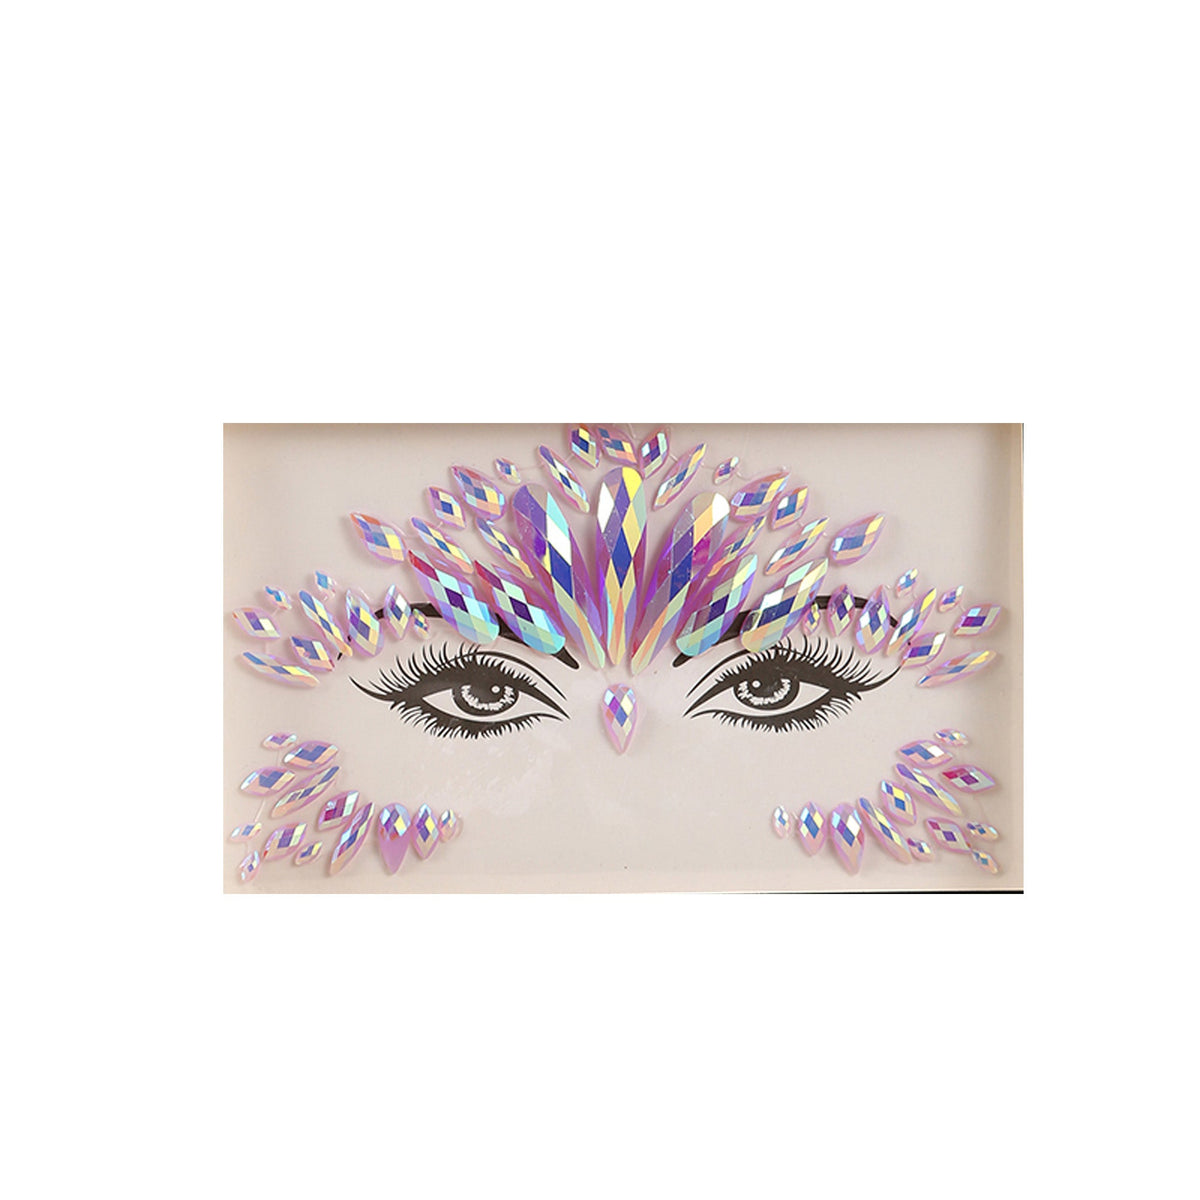 HONGFAN Costume Accessories Lilac Fantasy Face Art Crystal Stickers 8100776571956